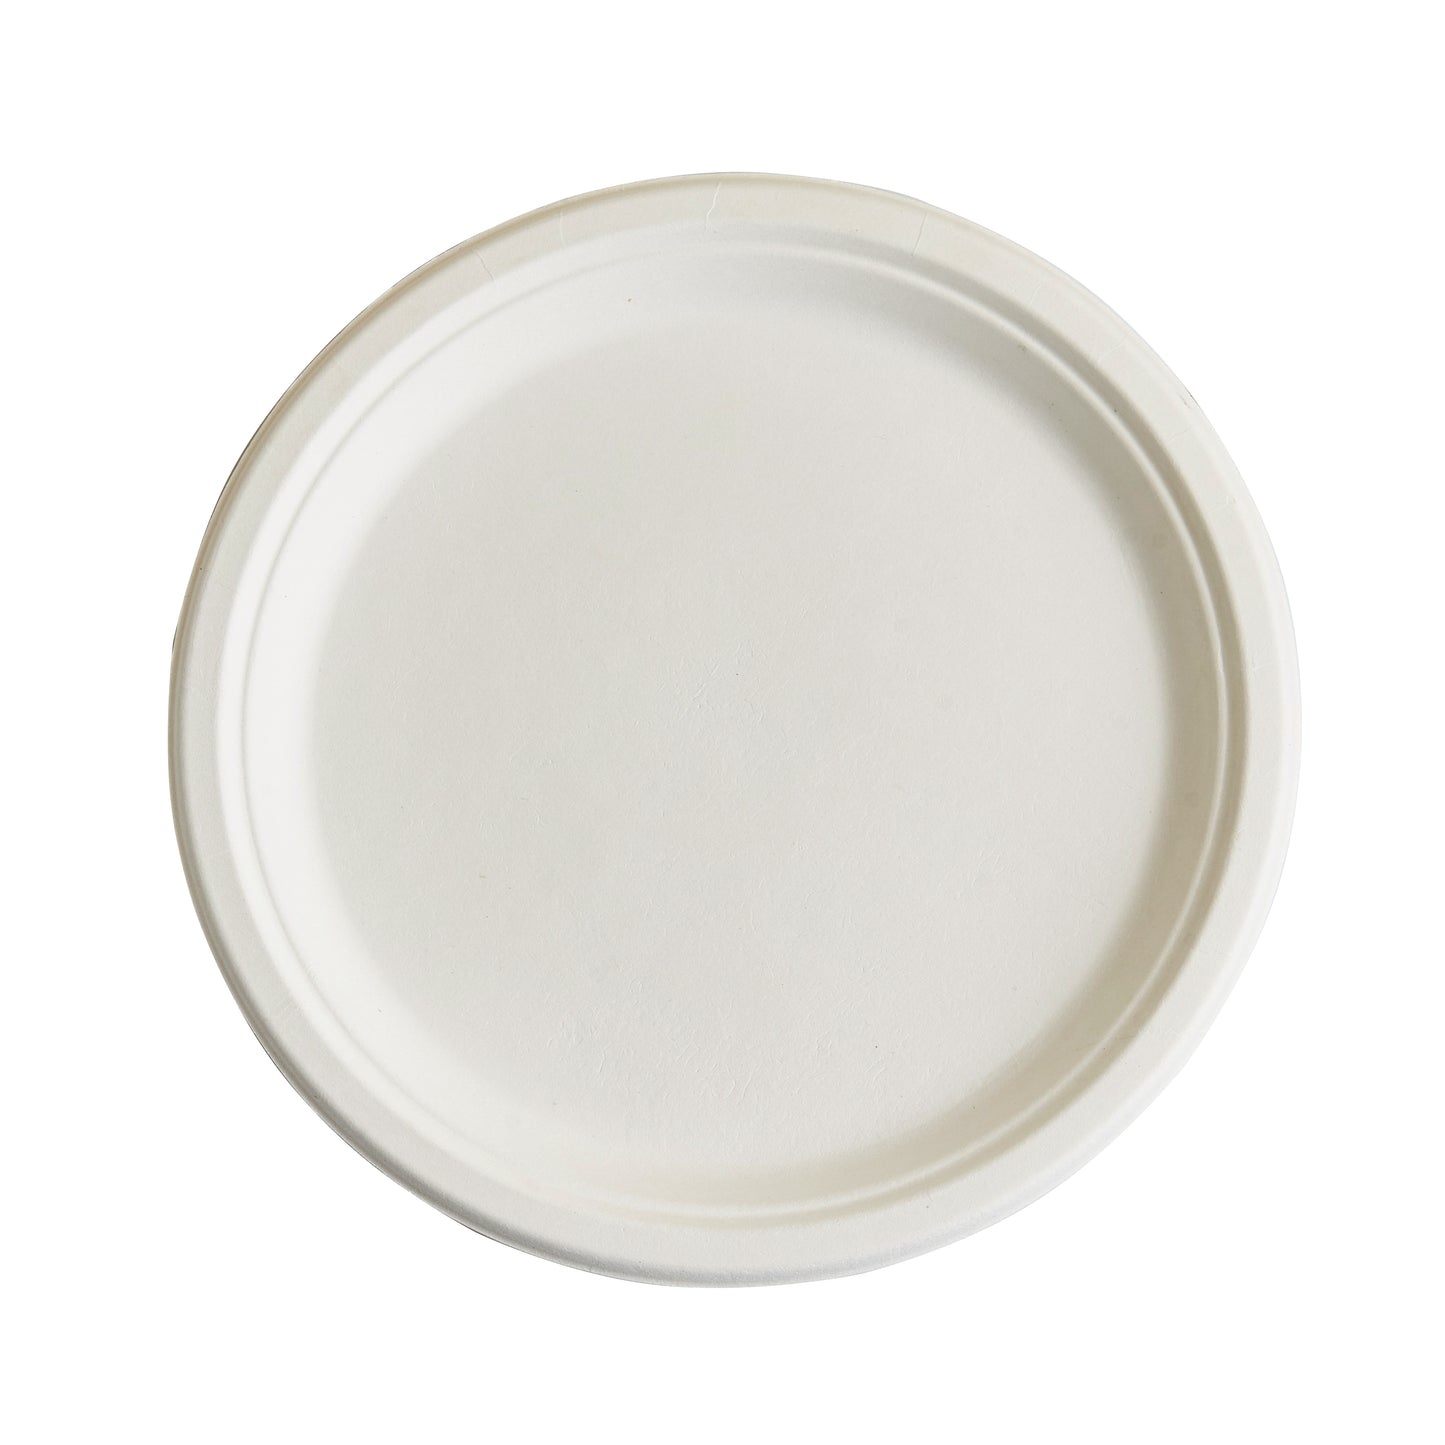 CIAO! 10" Heavy Duty Plate 100% Compostable PFAS Free Unbleached Bagasse Natural White (Pack of 500)